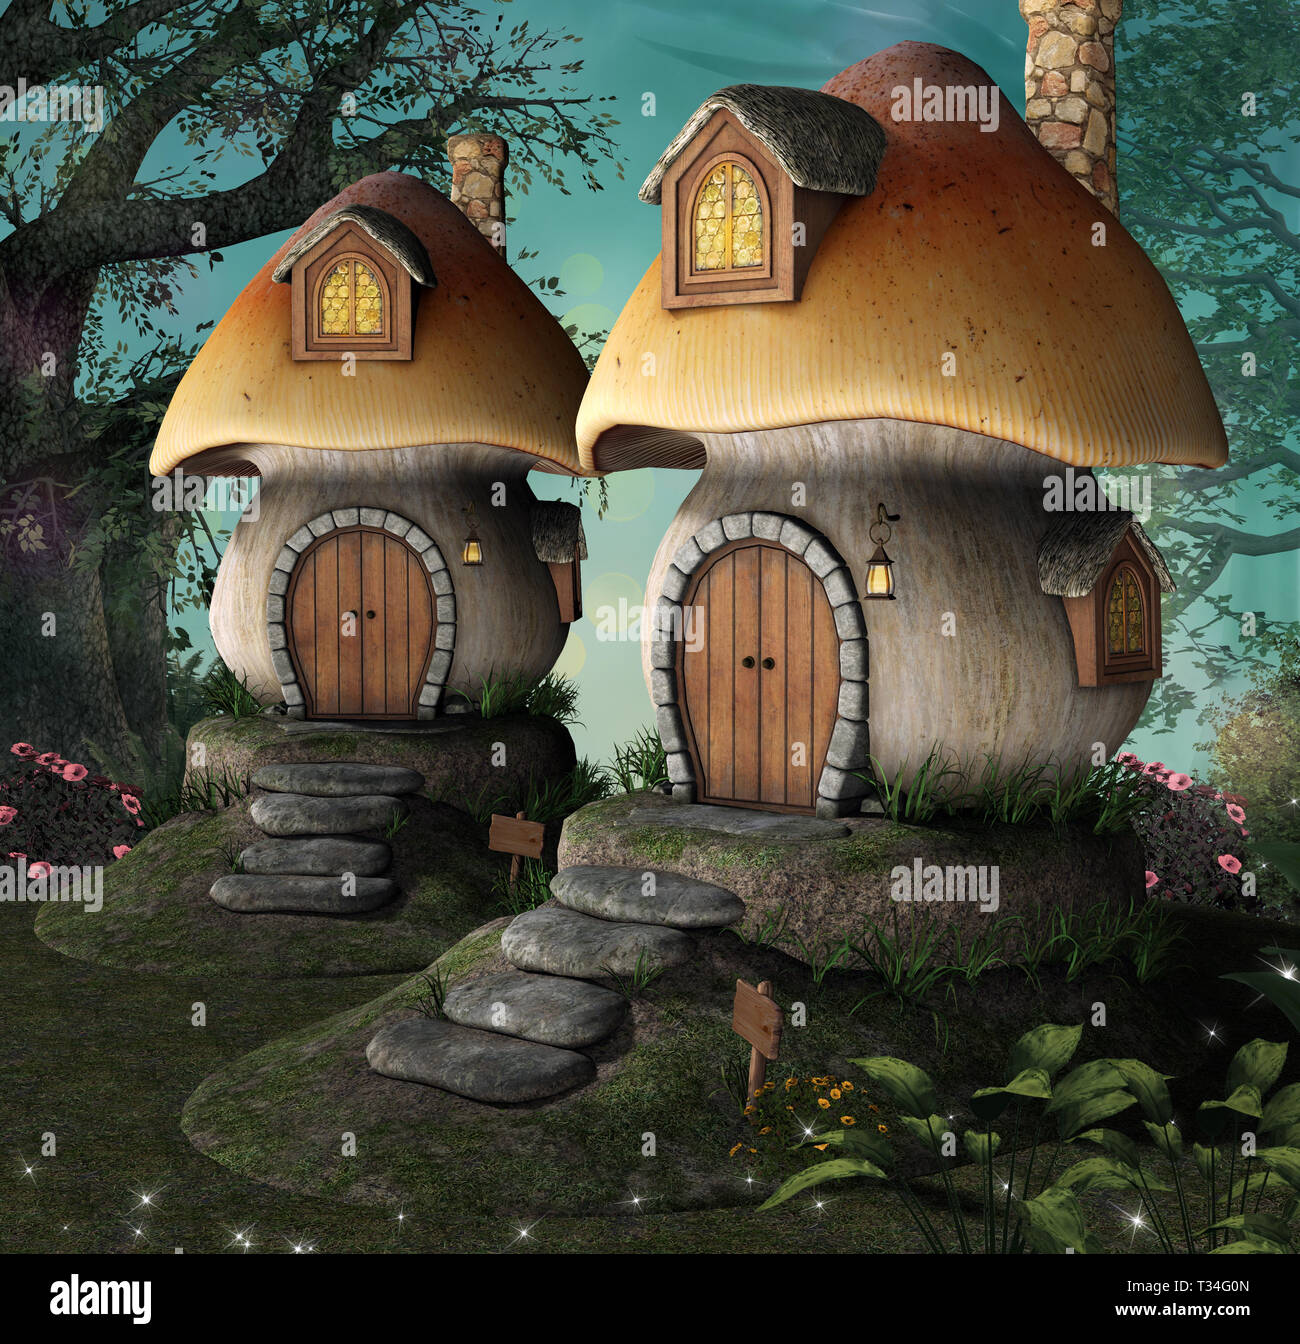 Elf houses in the shape of mushrooms Stock Photo